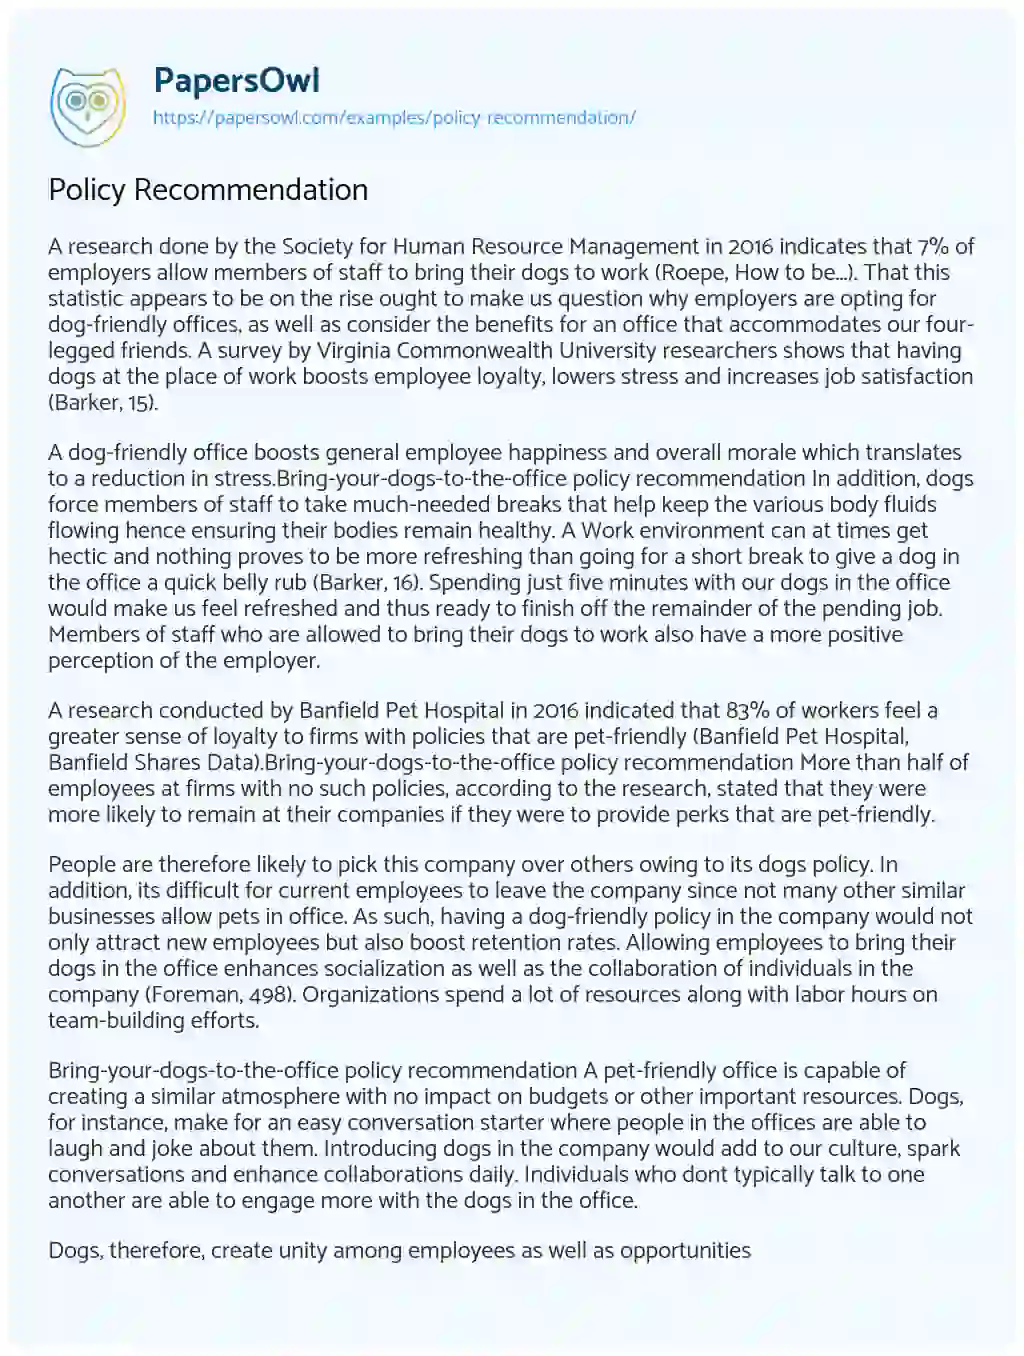 Essay on Policy Recommendation